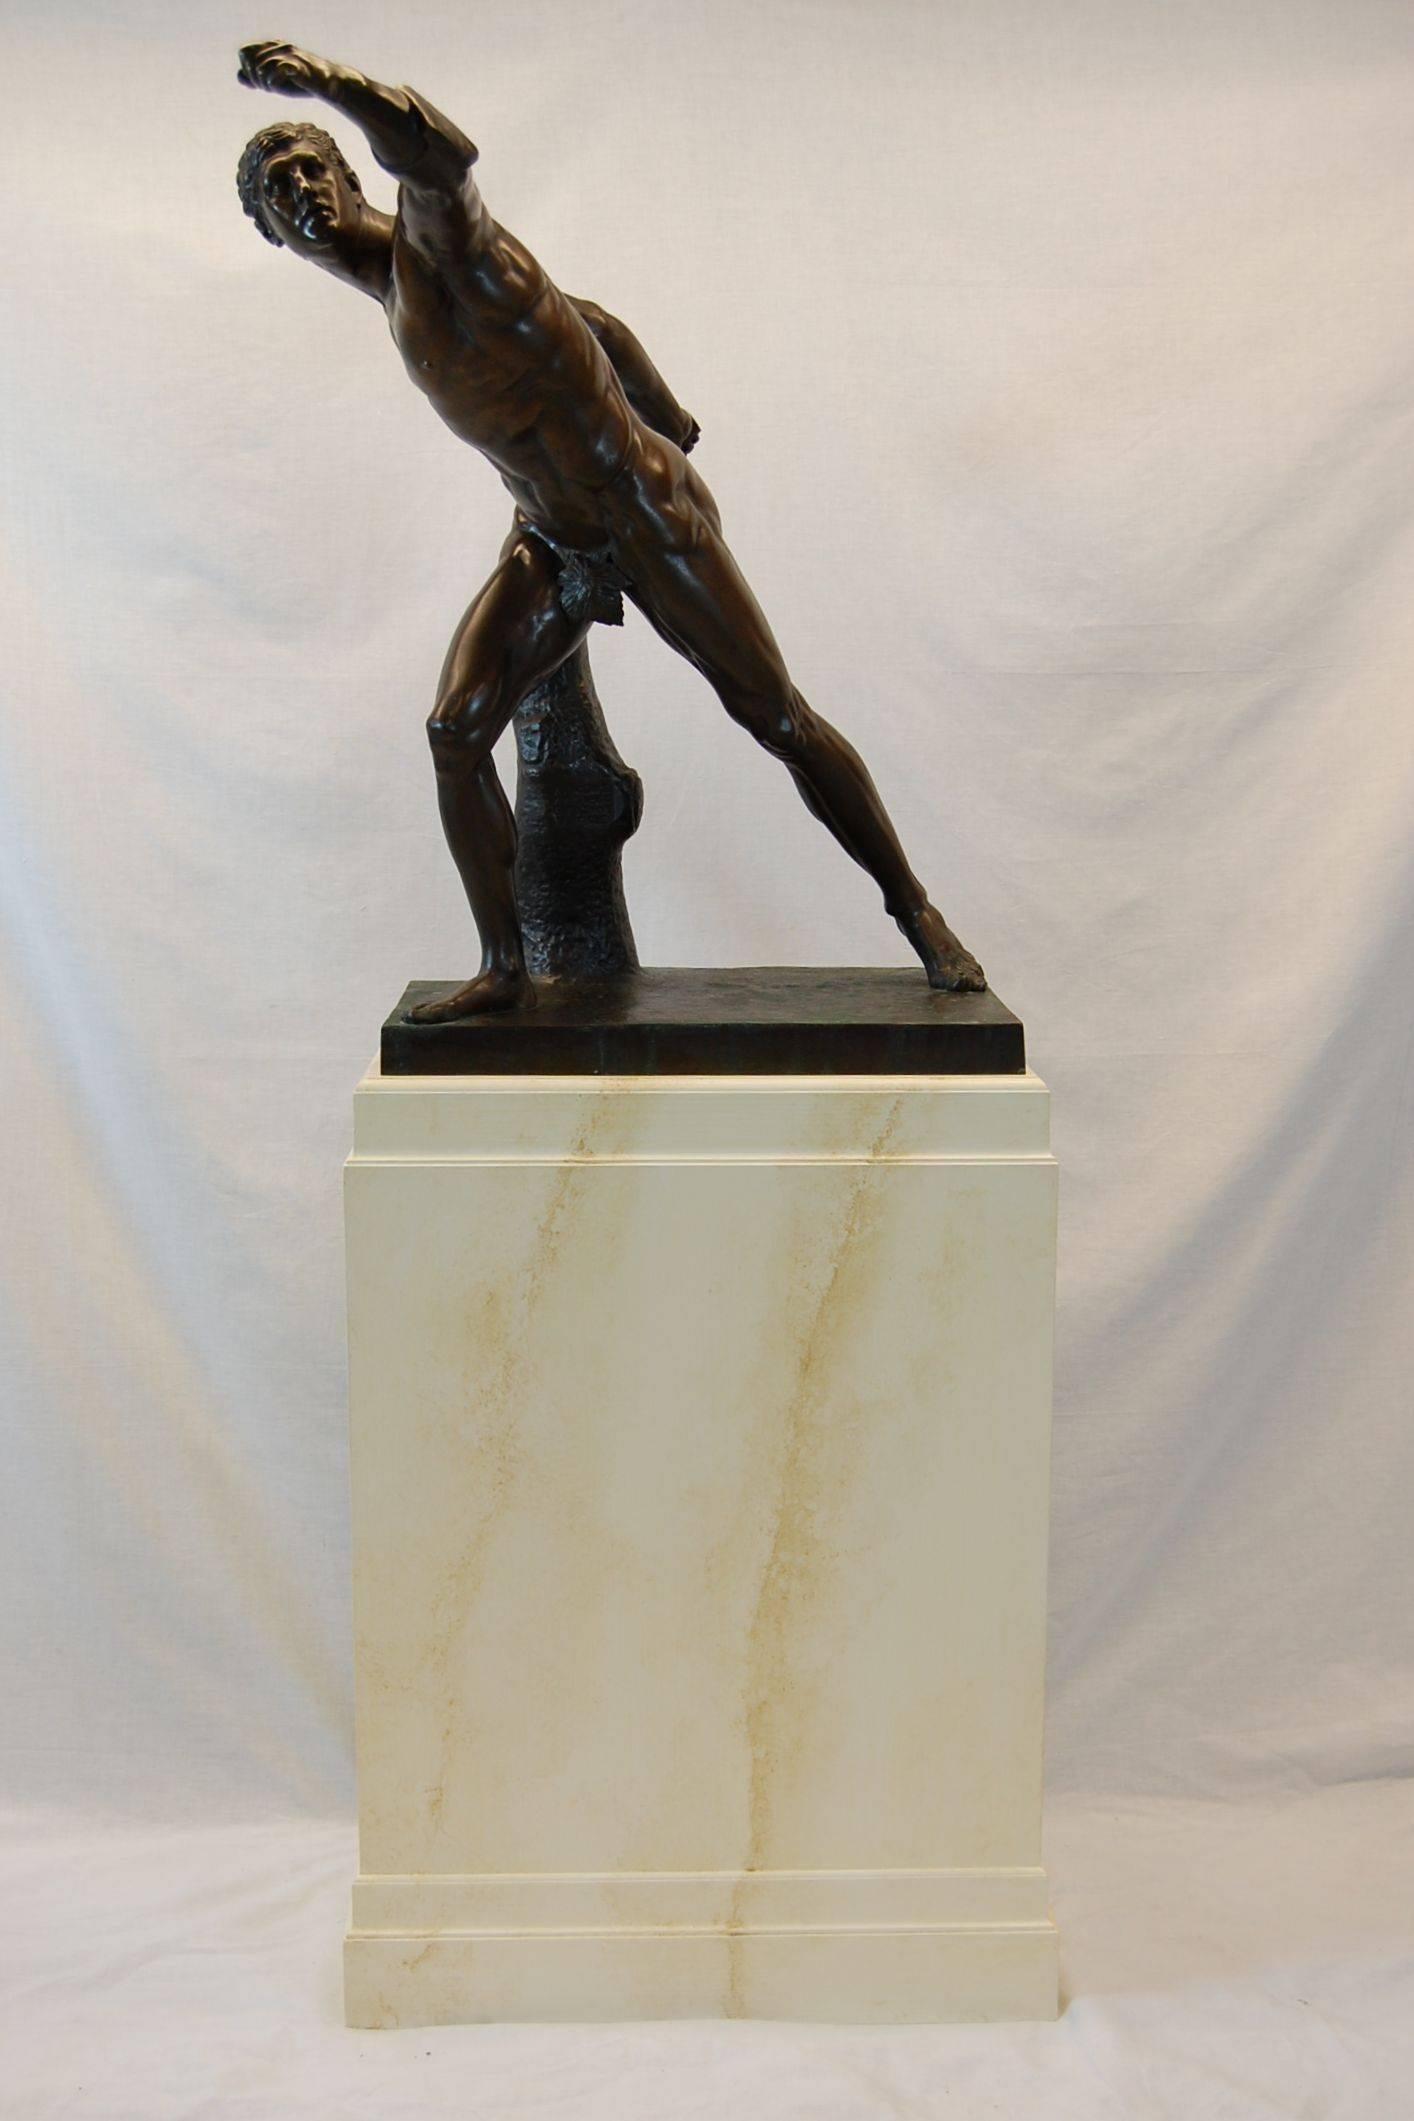 Excellent bronze casting of a Borghese gladiator resting atop a wooden plinth, stamped Tiffany & Co. on the rear, flat surface. The custom marbleized wooden base (by Hadleigh Furn. Co.) measures 34.5